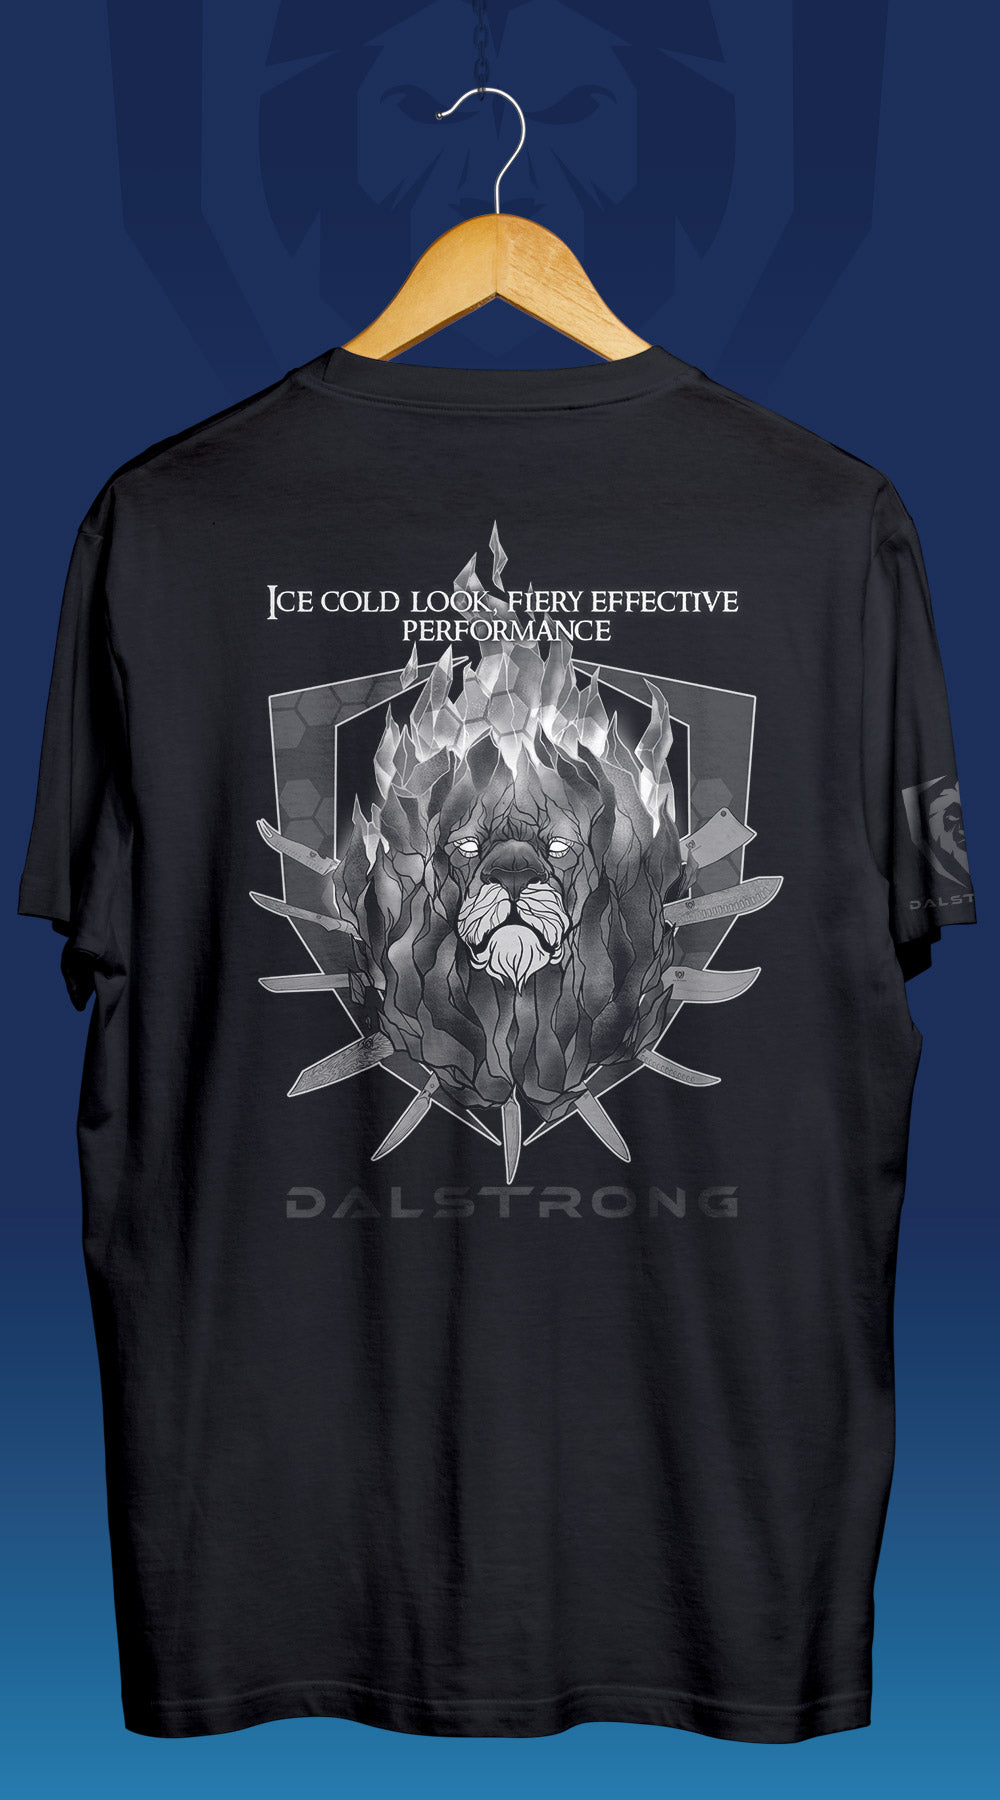 Dalstrong light your fire tee black back design.